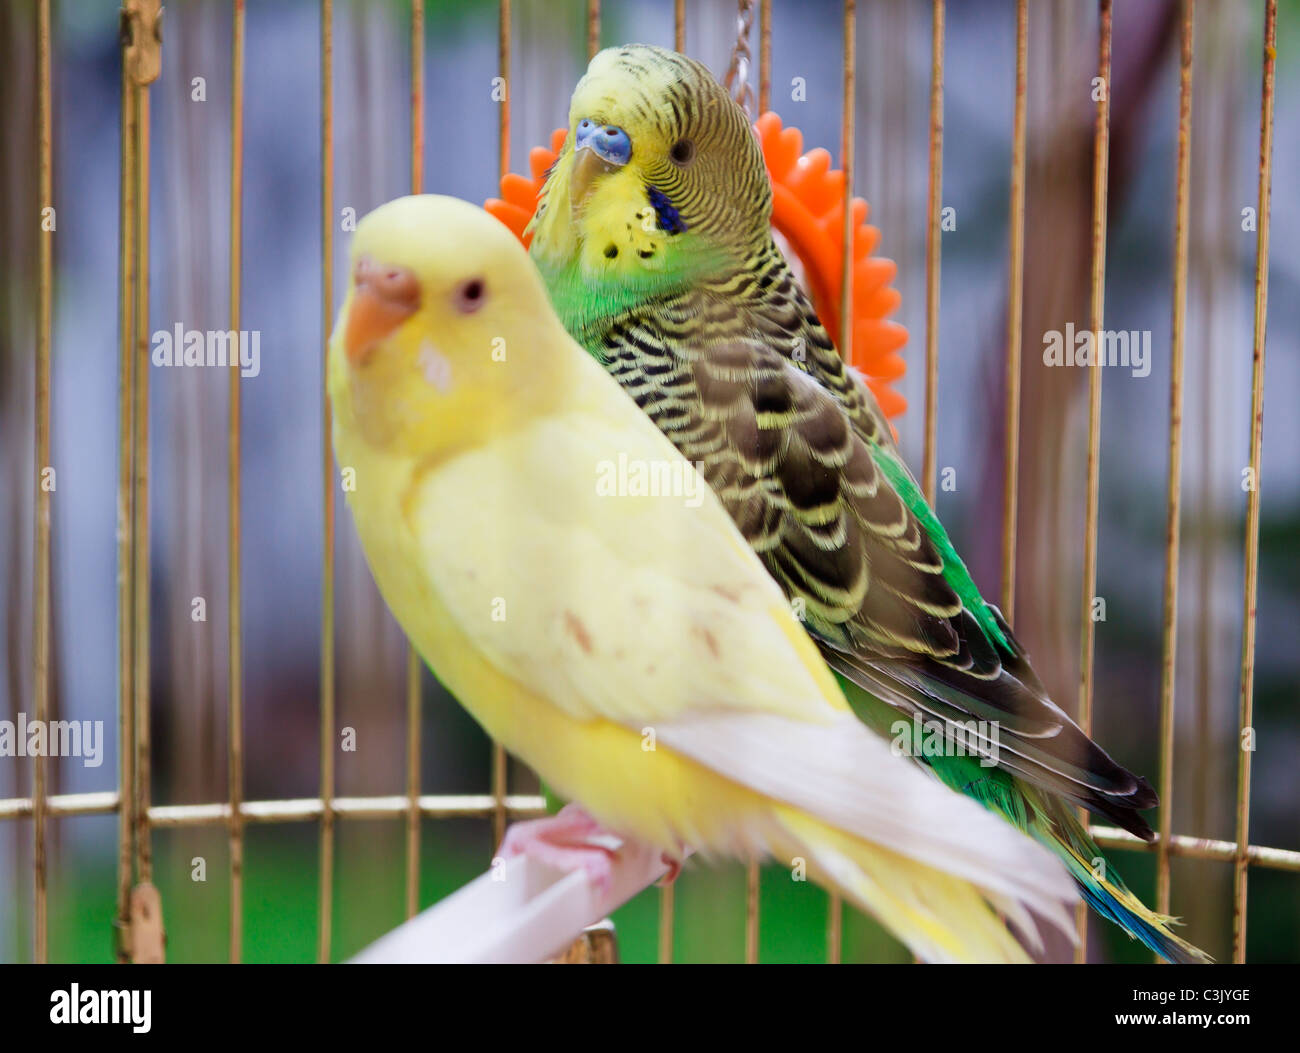 yellow and green parrots in cage outdoor Stock Photo